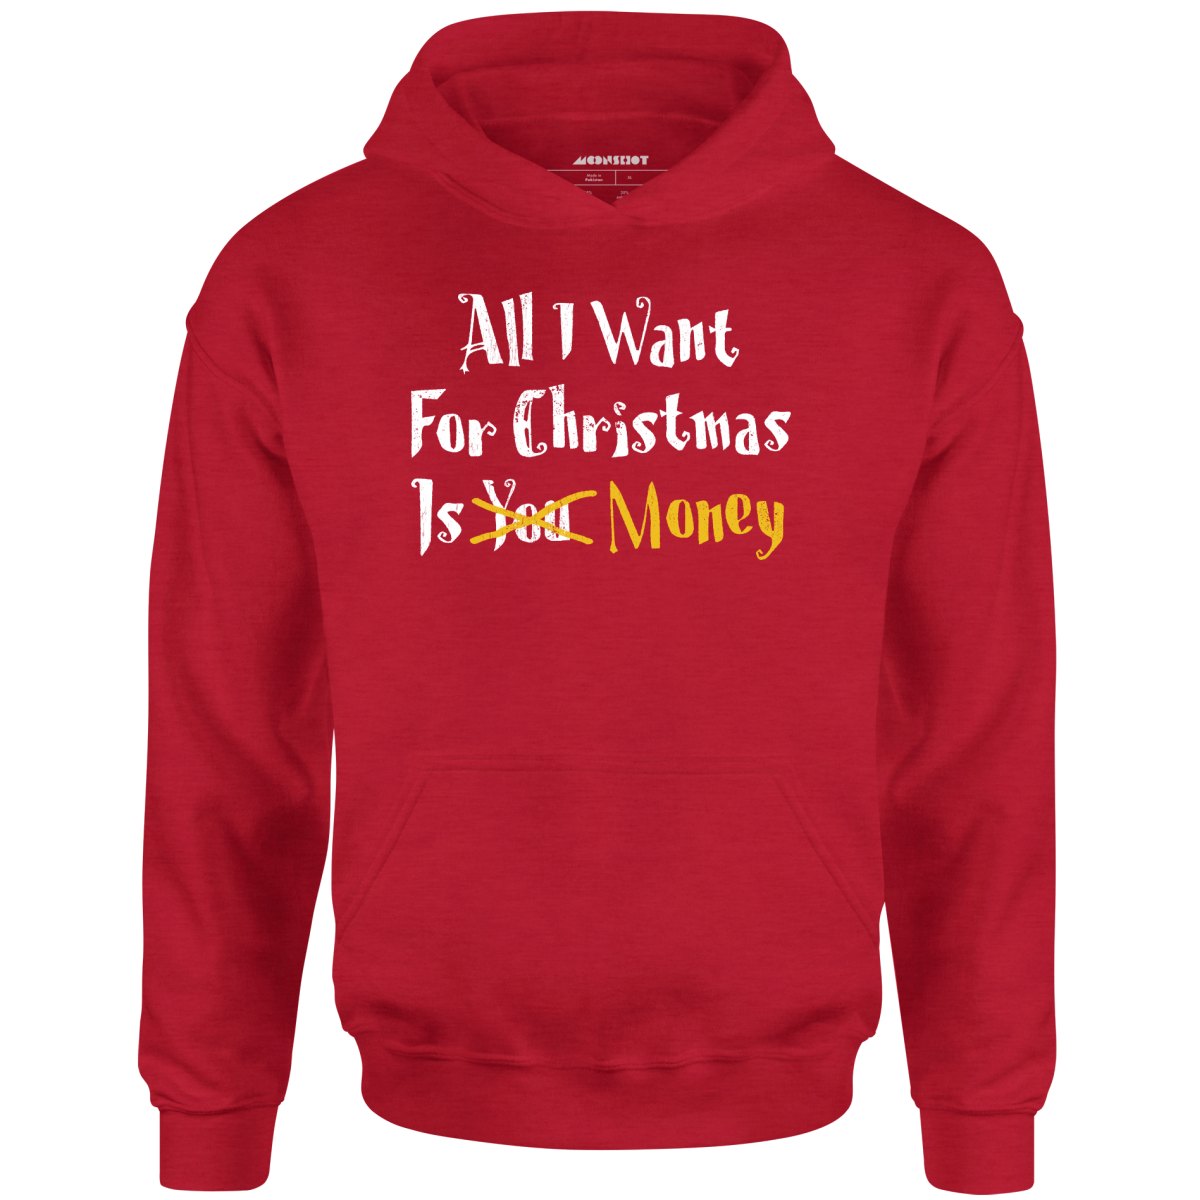 All I Want for Christmas is Money - Unisex Hoodie